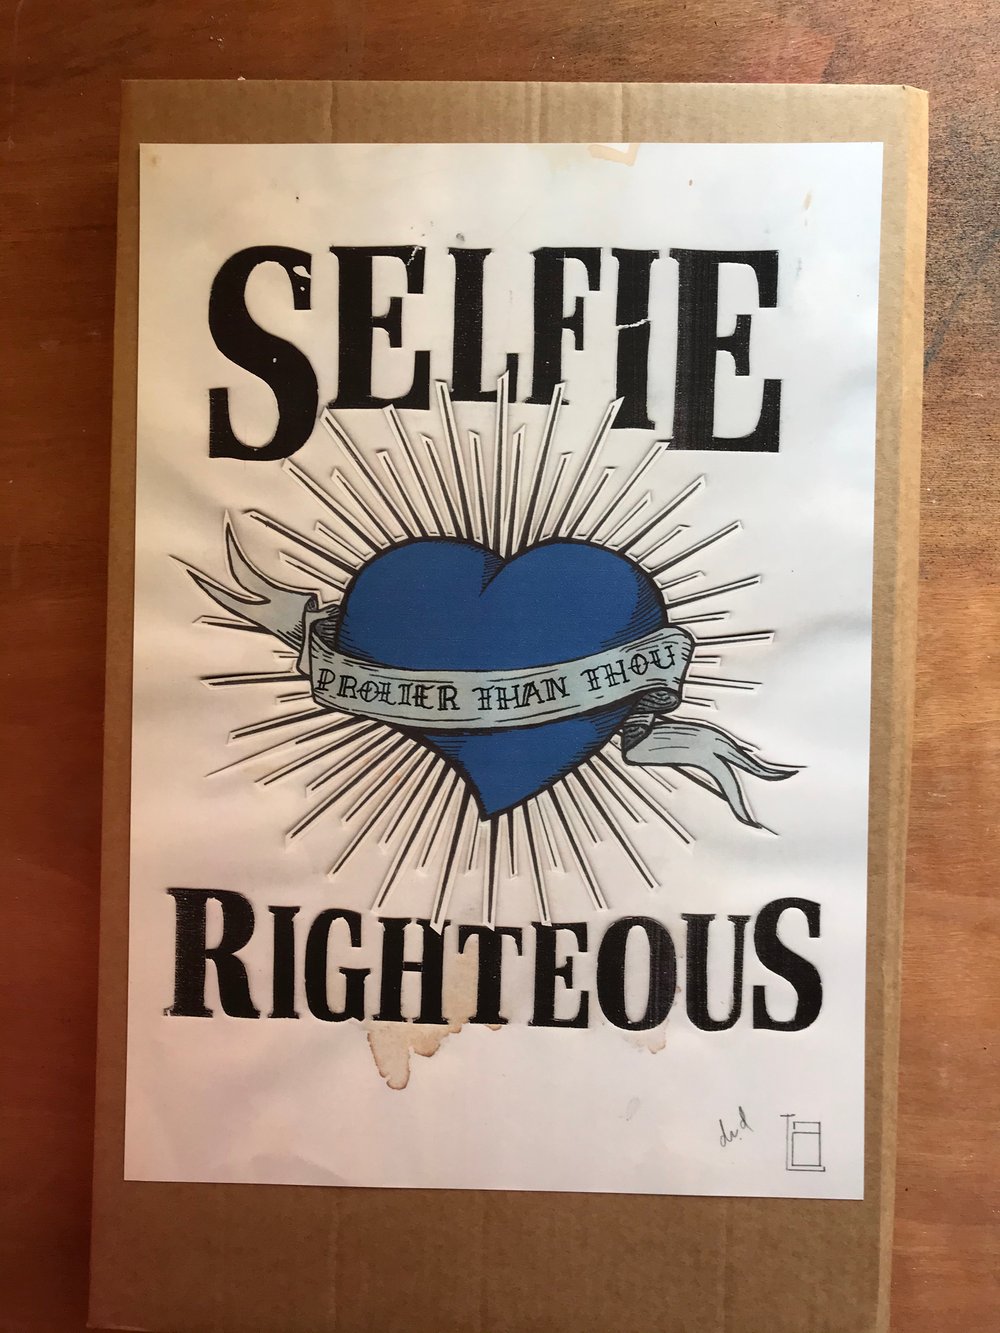 Image of PROLIER THAN THOU - SELFIE RIGHTEOUS 